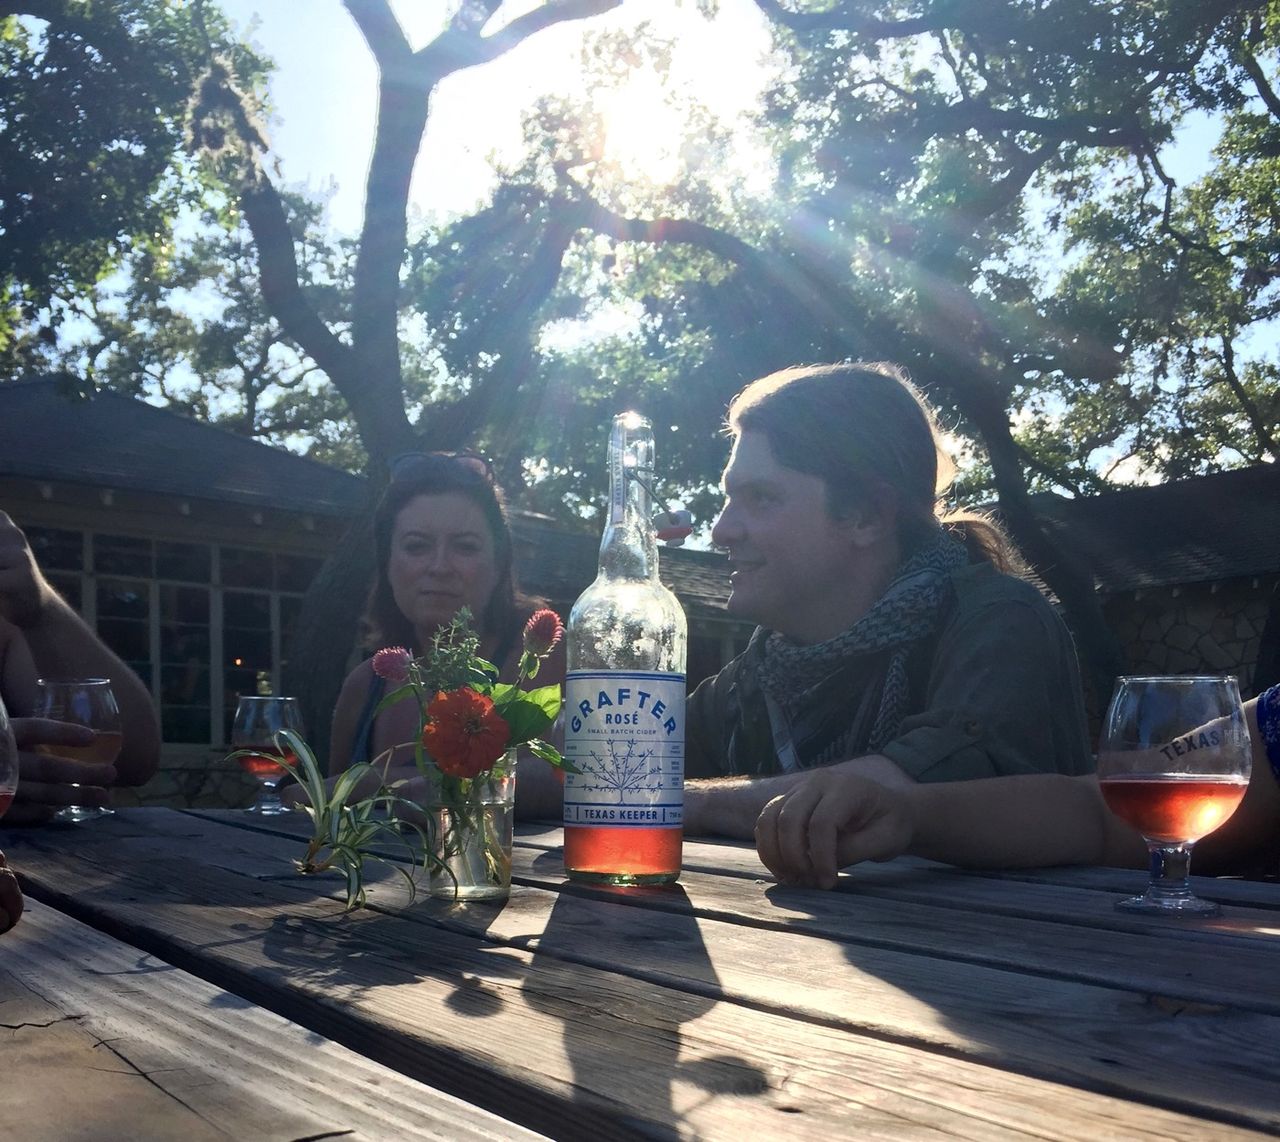 Friends at a table as the sun hangs in the sky.